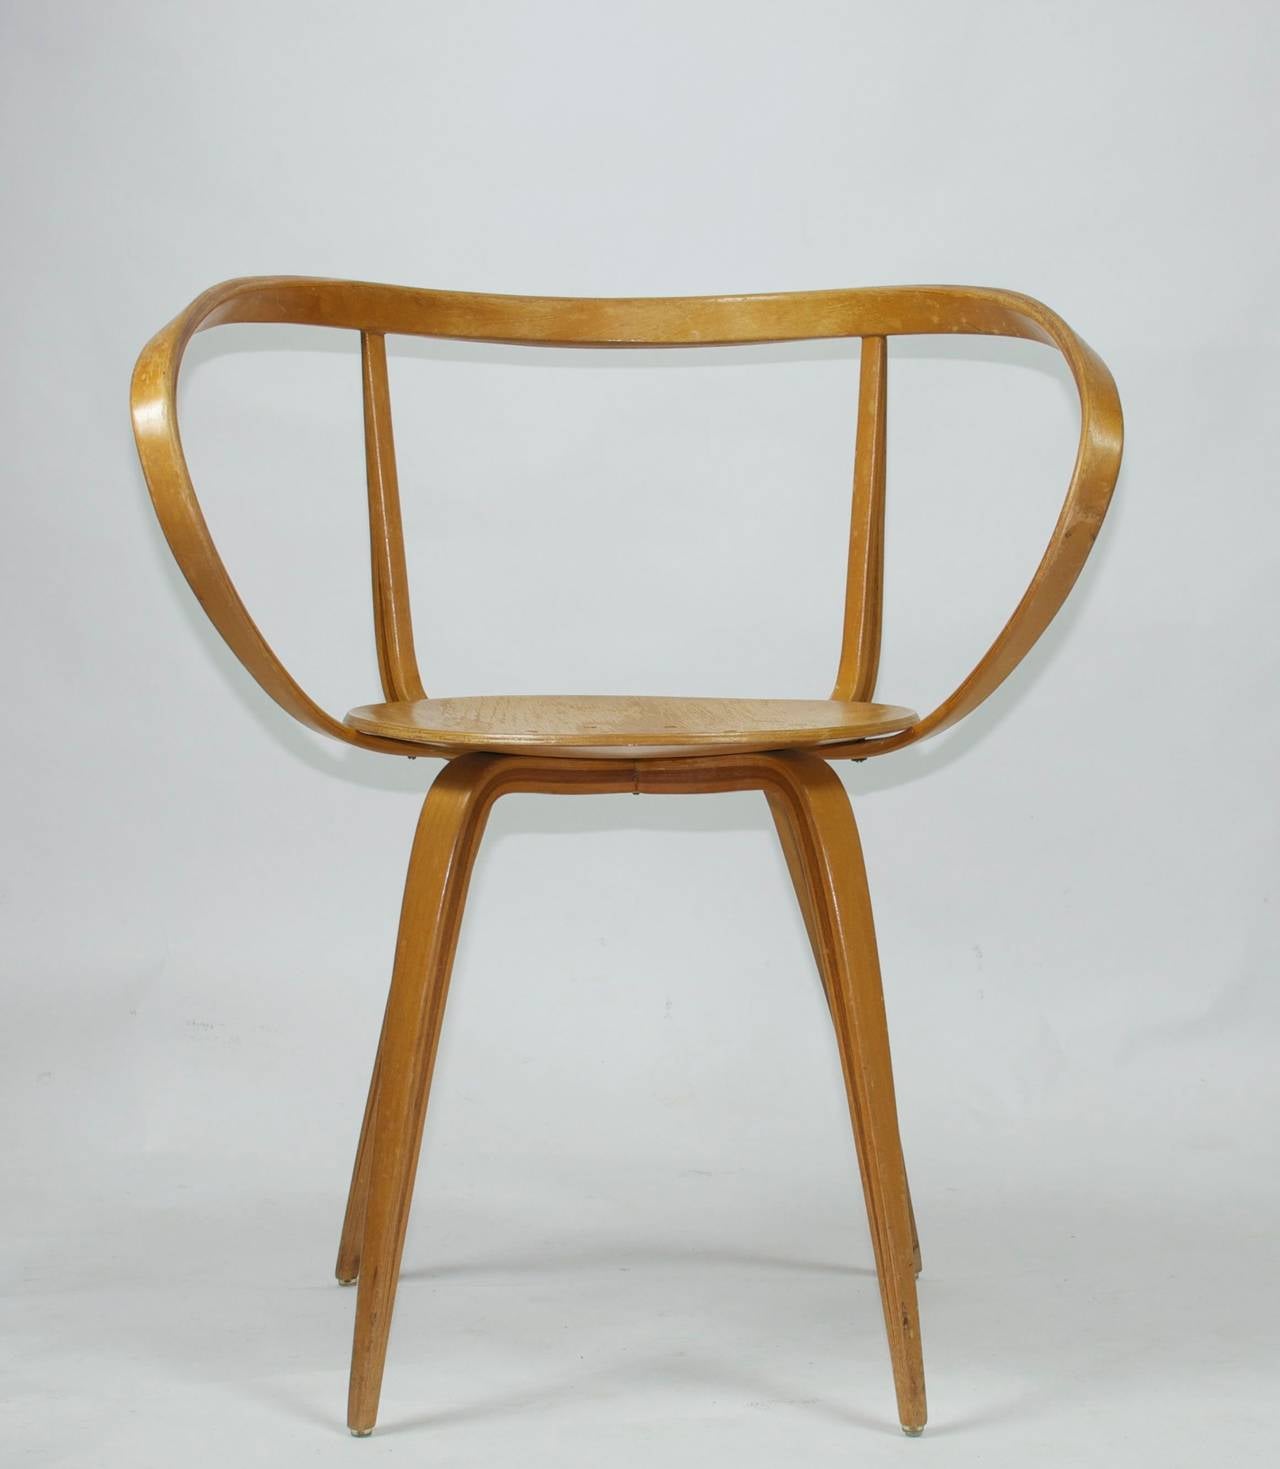 George Nelson pretzel chair manufactured for Herman Miller. Model # 5890. Beautiful example in excellent original condition.